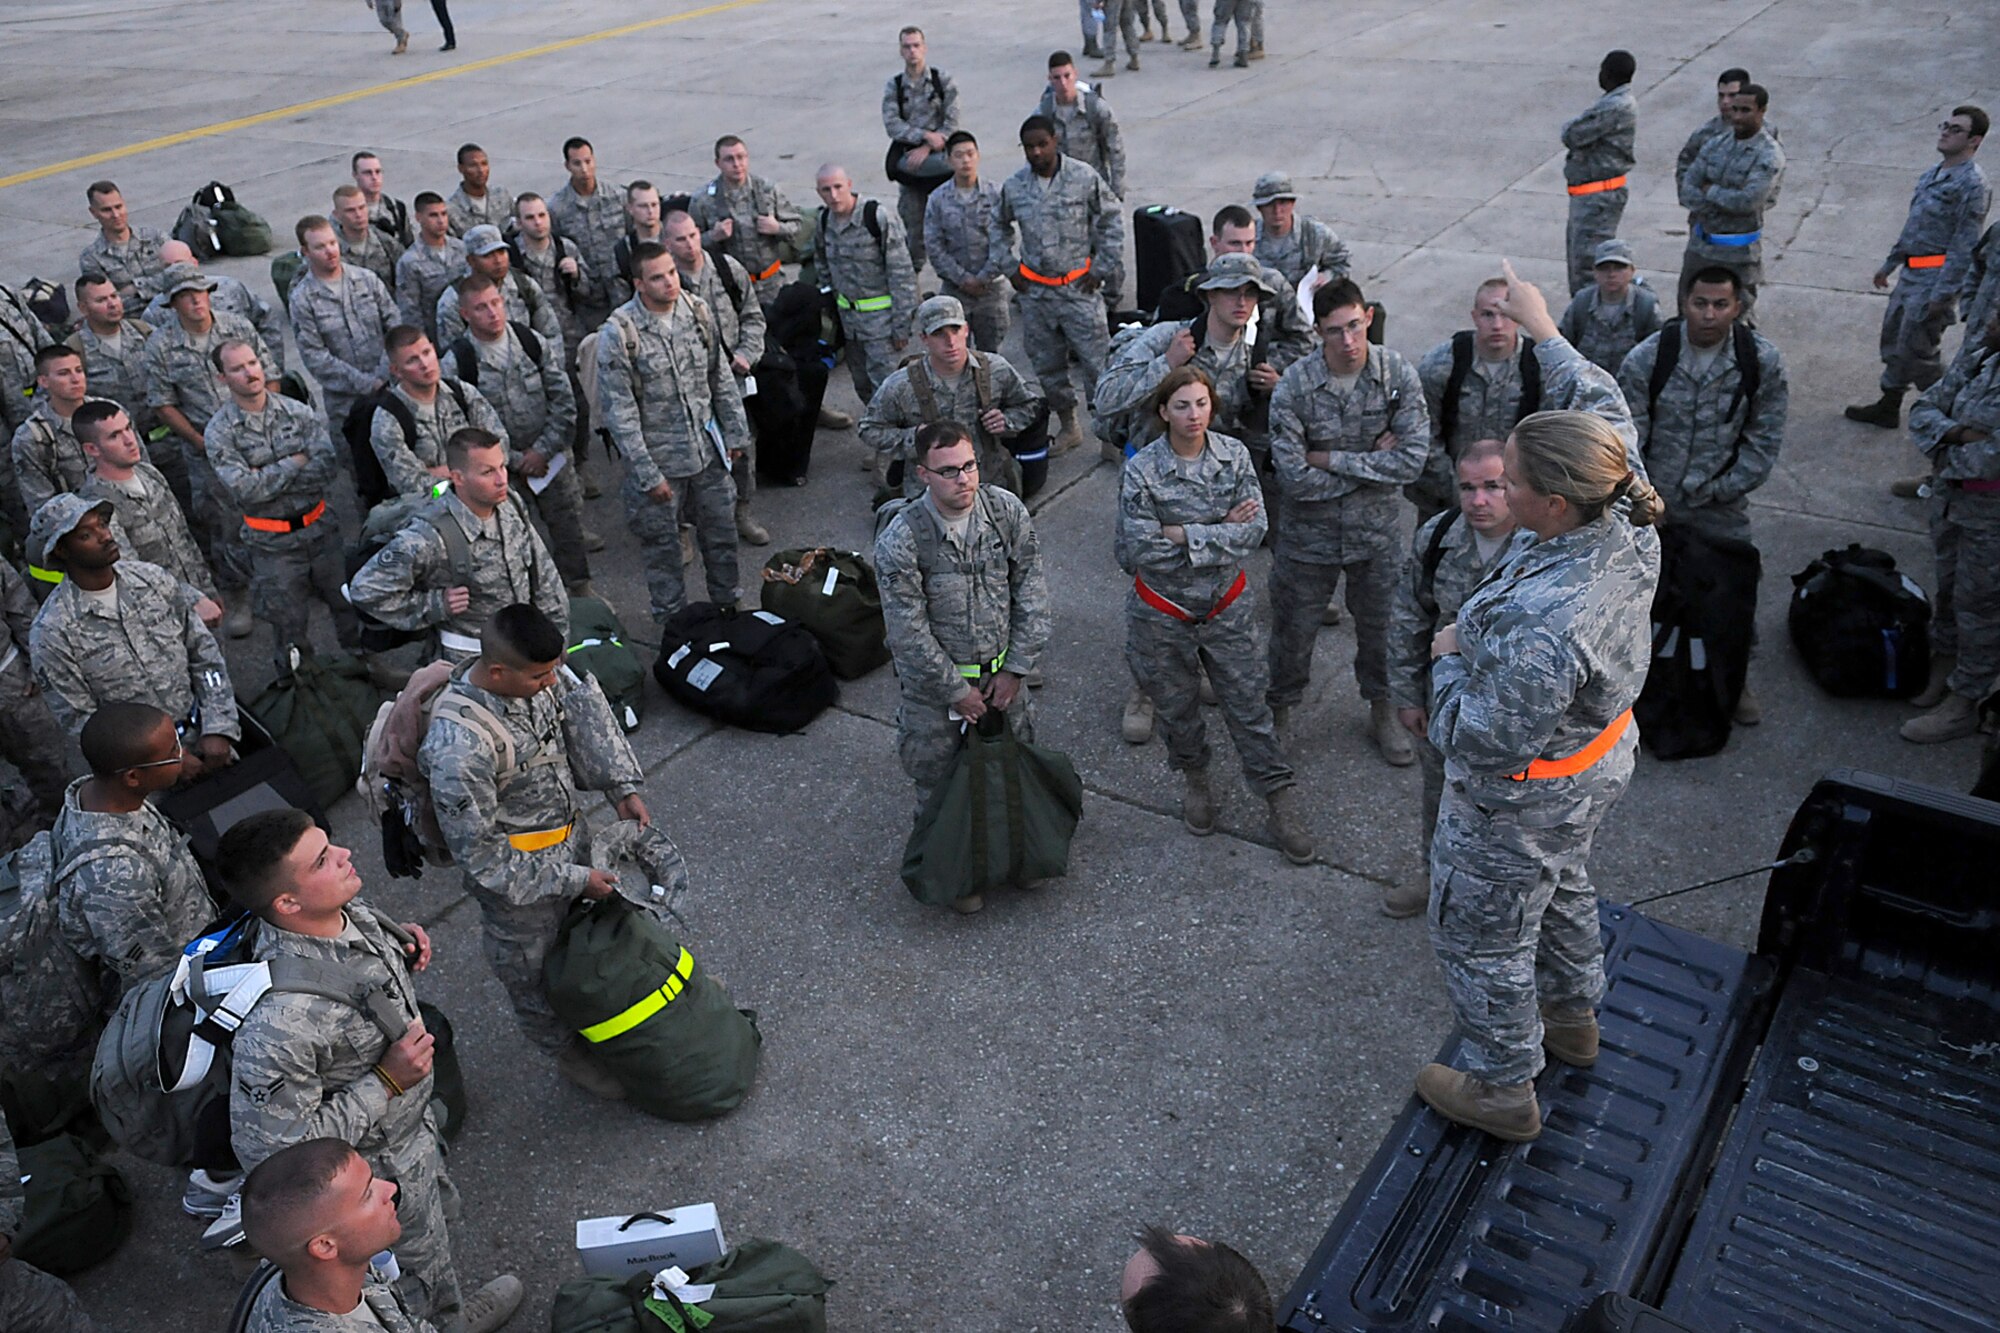 SPANGDAHLEM AIR BASE, Germany - Maj. Kelley Stevens, 52nd Equipment Maintenance Squadron commander, welcomes her Airmen back from a four-month deployment to Joint Base Balad, Iraq, Sept. 28. The 52nd EMS provided maintenance support for the 22nd Fighter Squadron. (U.S. Air Force photo/Airman 1st Class Nathanael Callon)